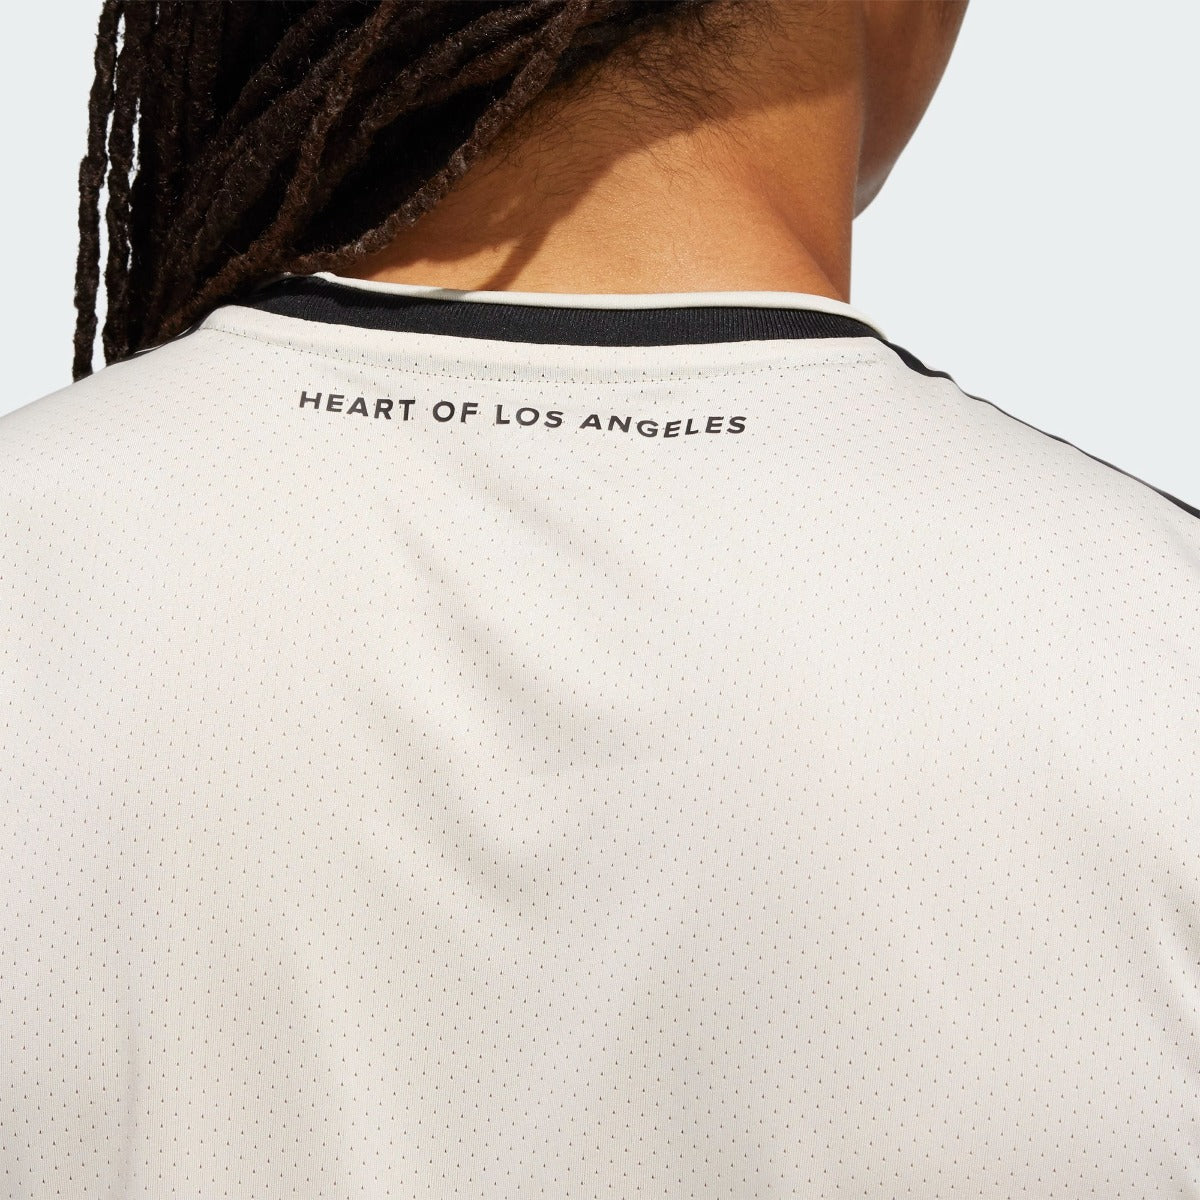 Adidas 2021-22 LAFC Authentic Away Jersey - Beige-White (Detail 1)